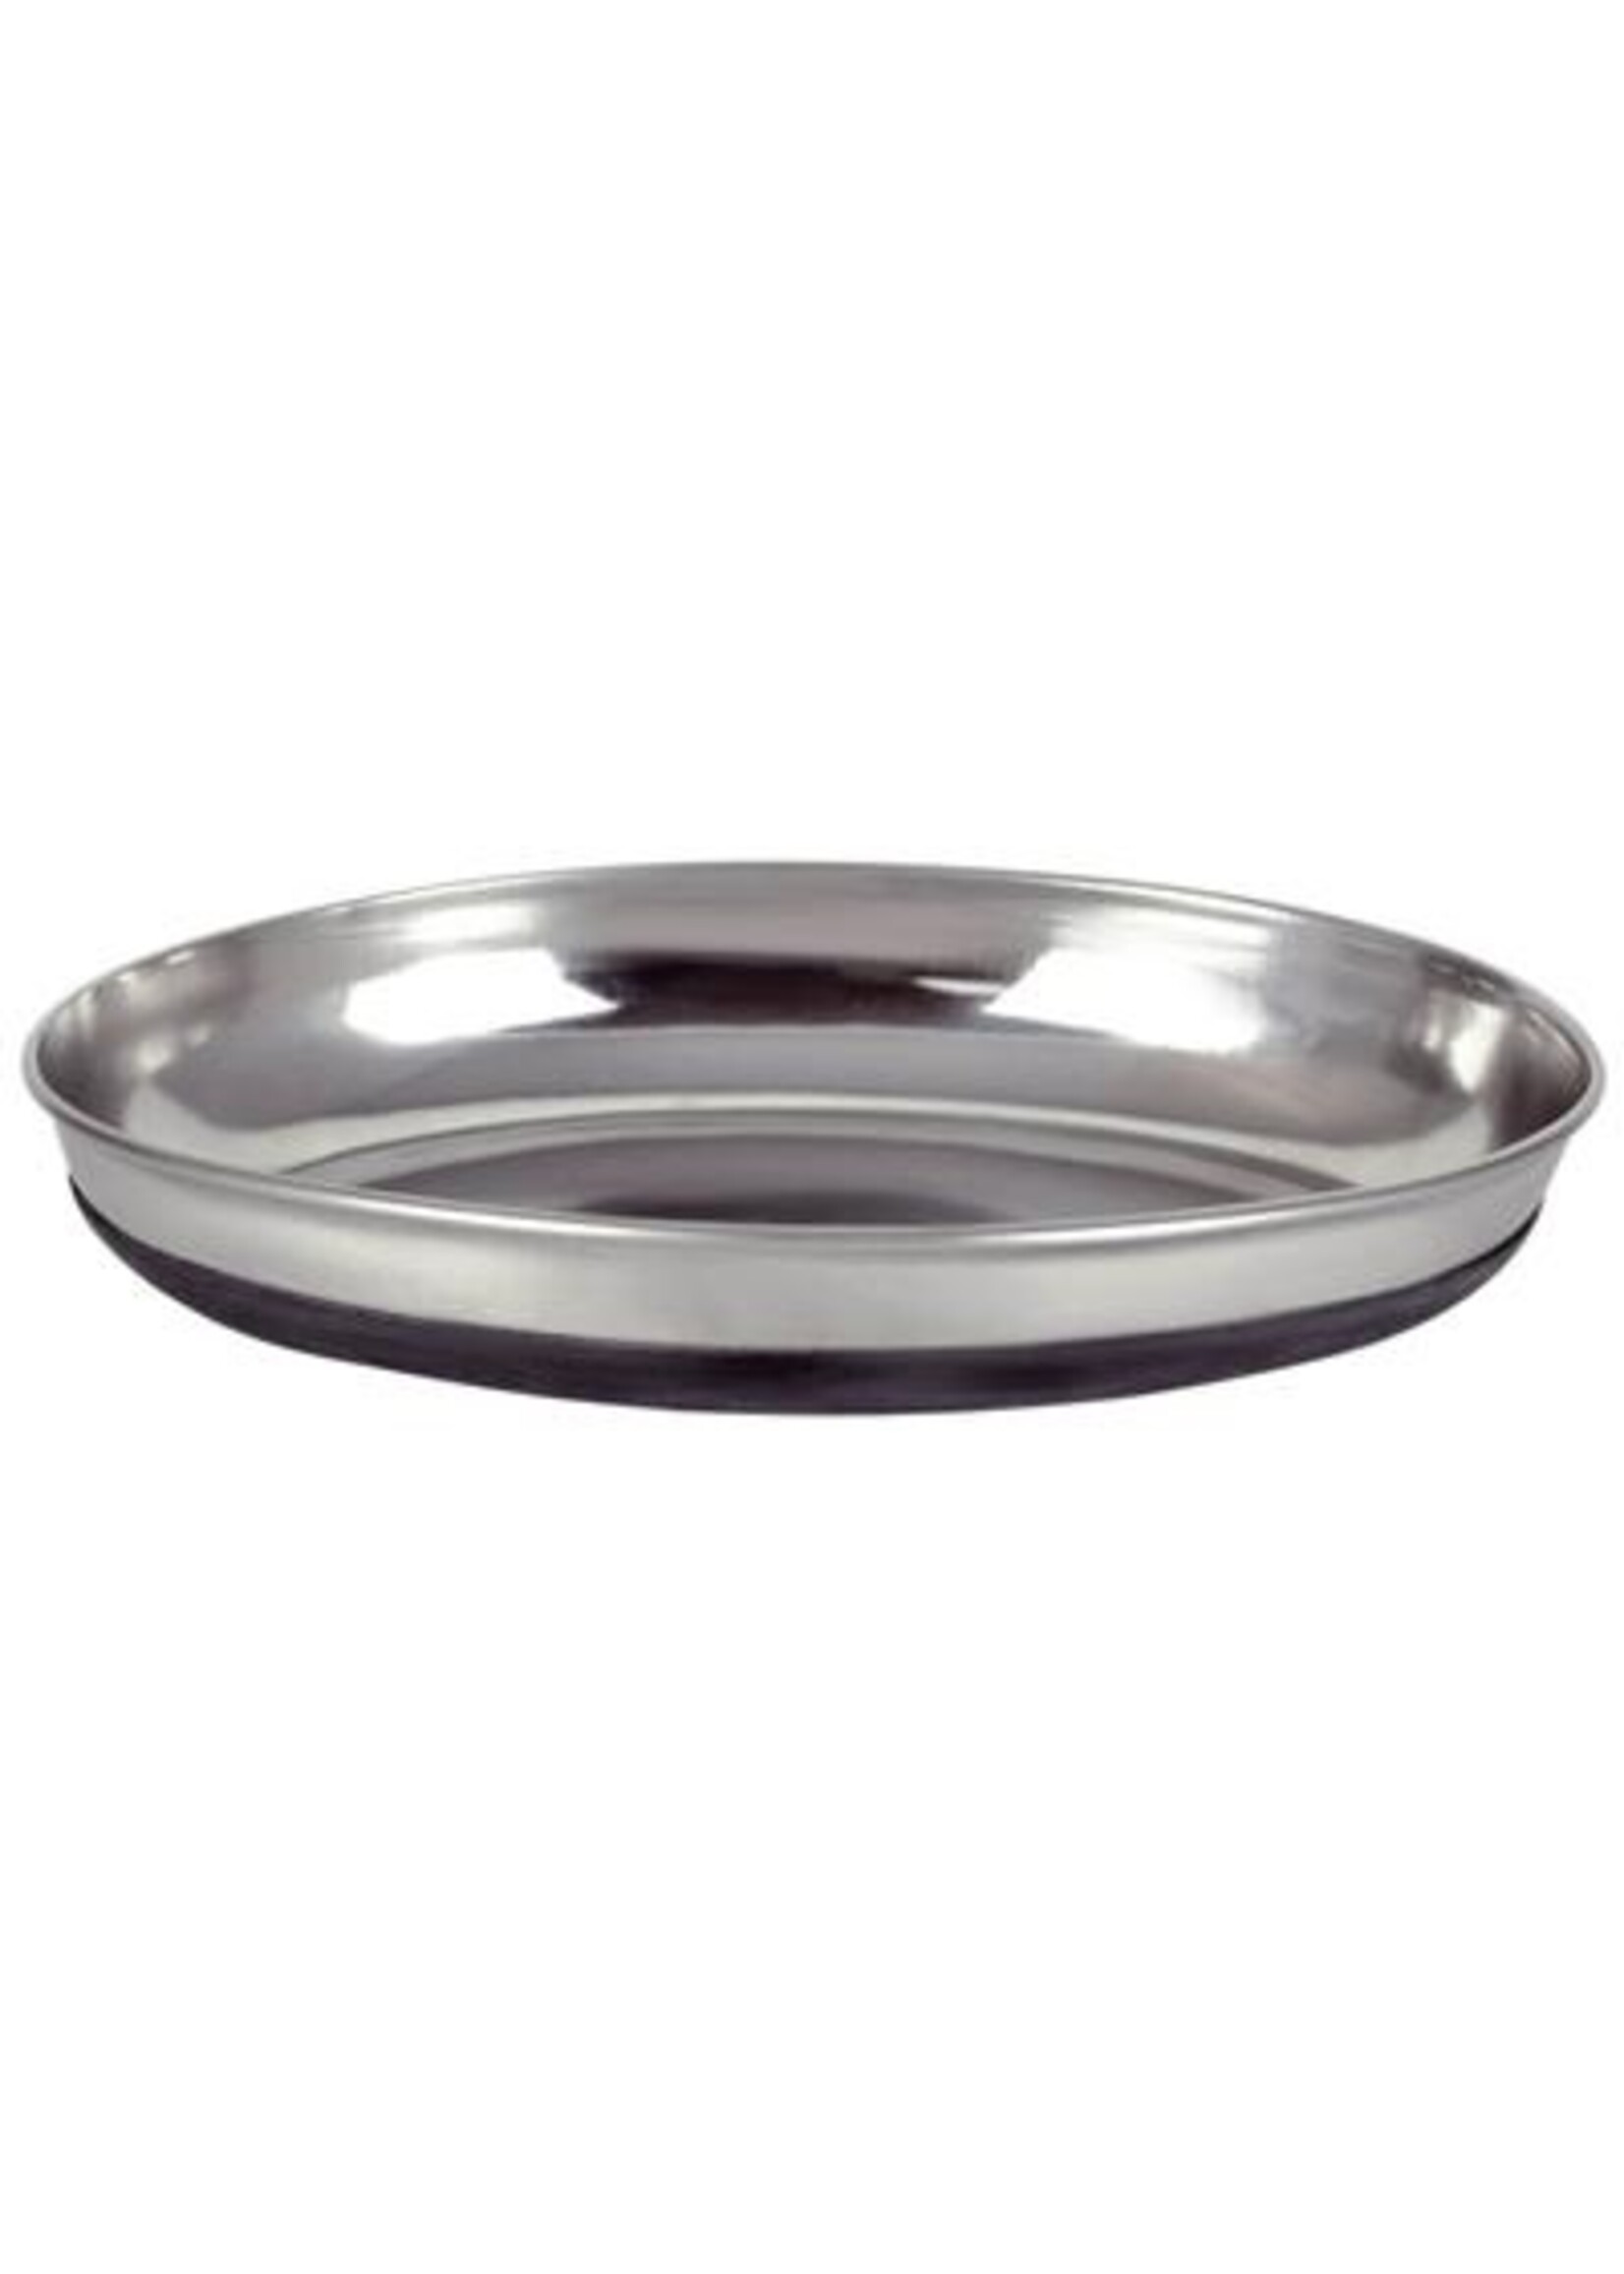 Unleashed Stainless Steel Oval Dish 1.25cup Cat